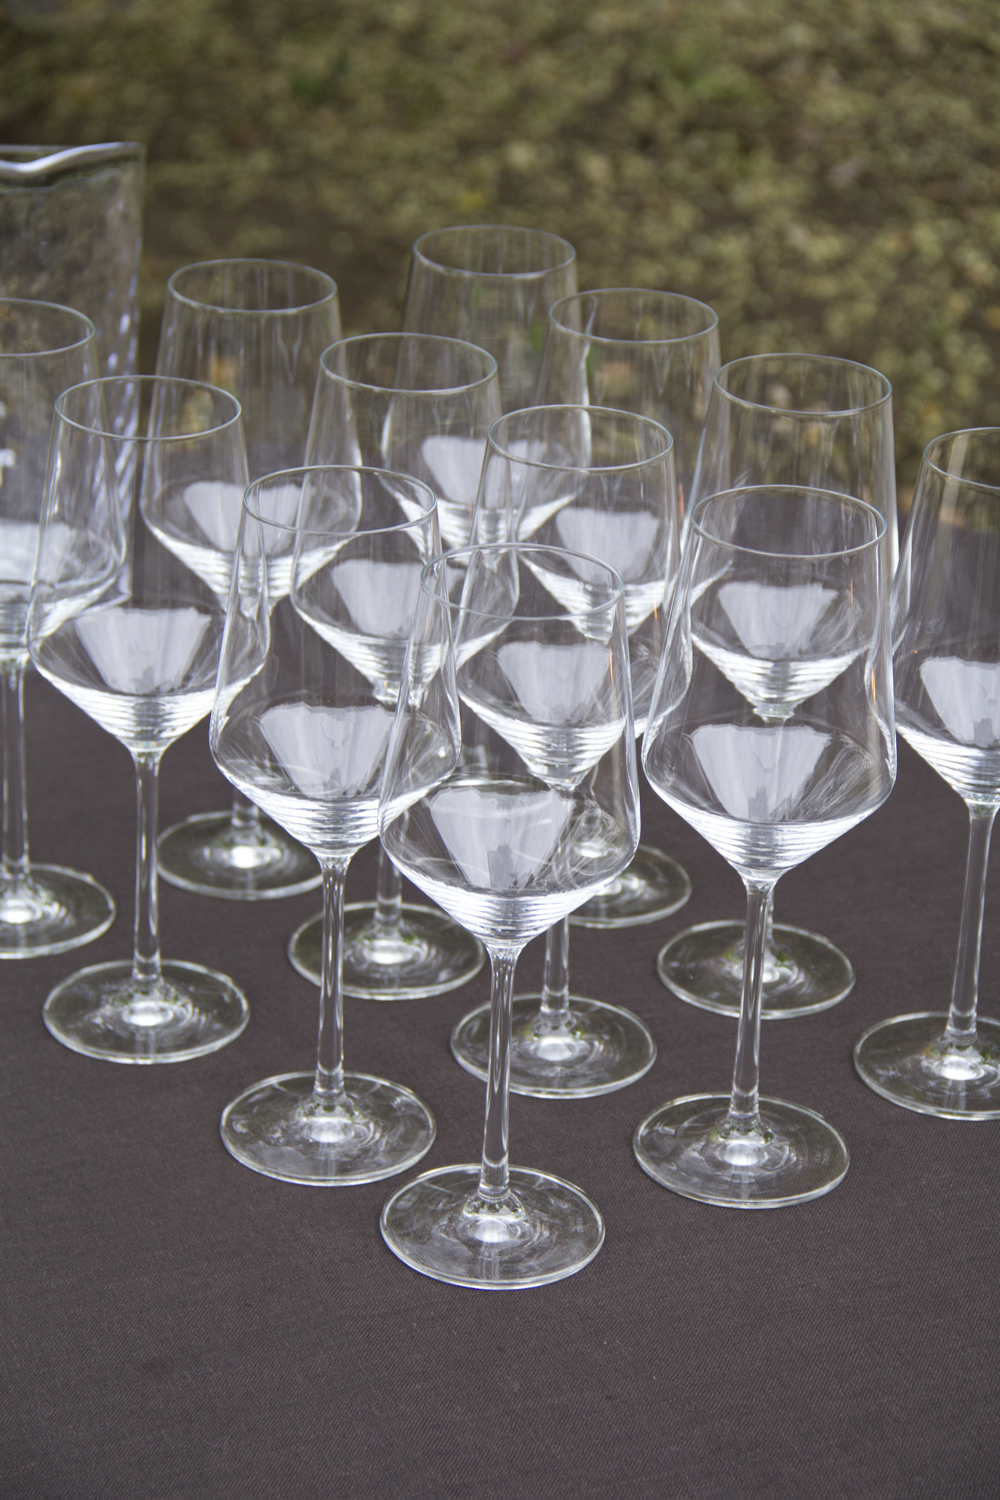 many glasses that are sitting next to each other